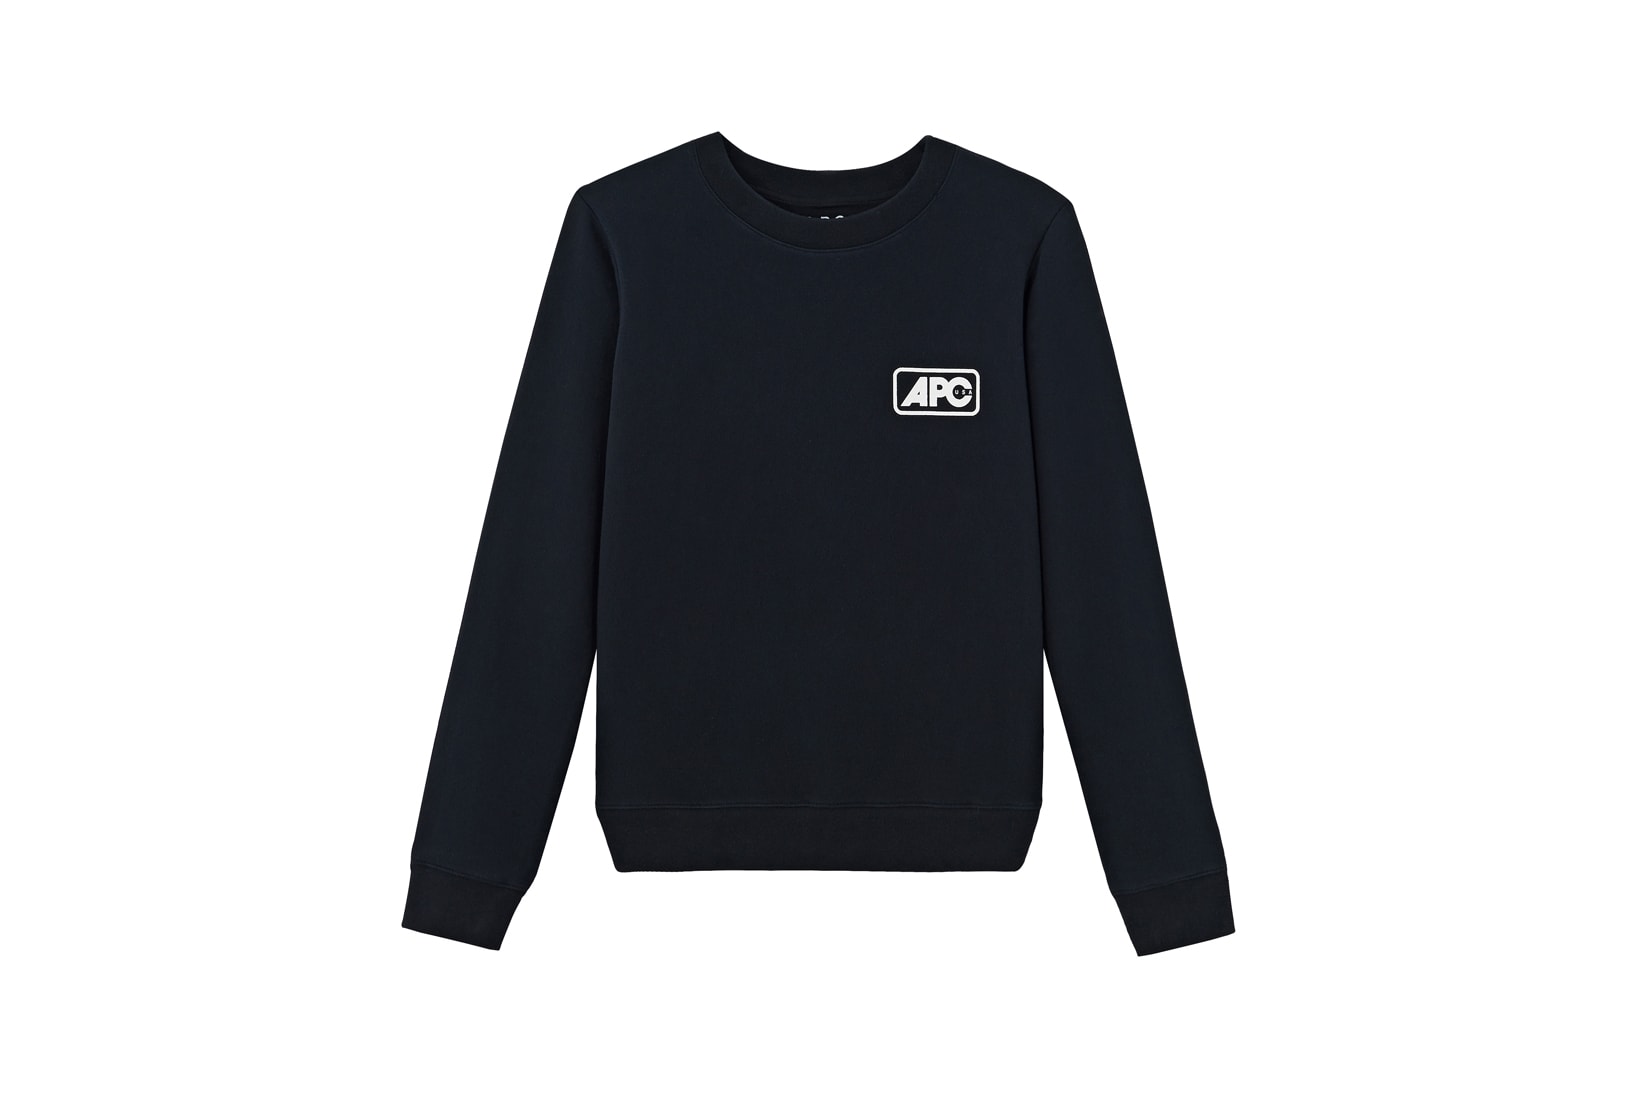 A.P.C. Fall/Winter 2018 Collection Odette Sweatshirt Black